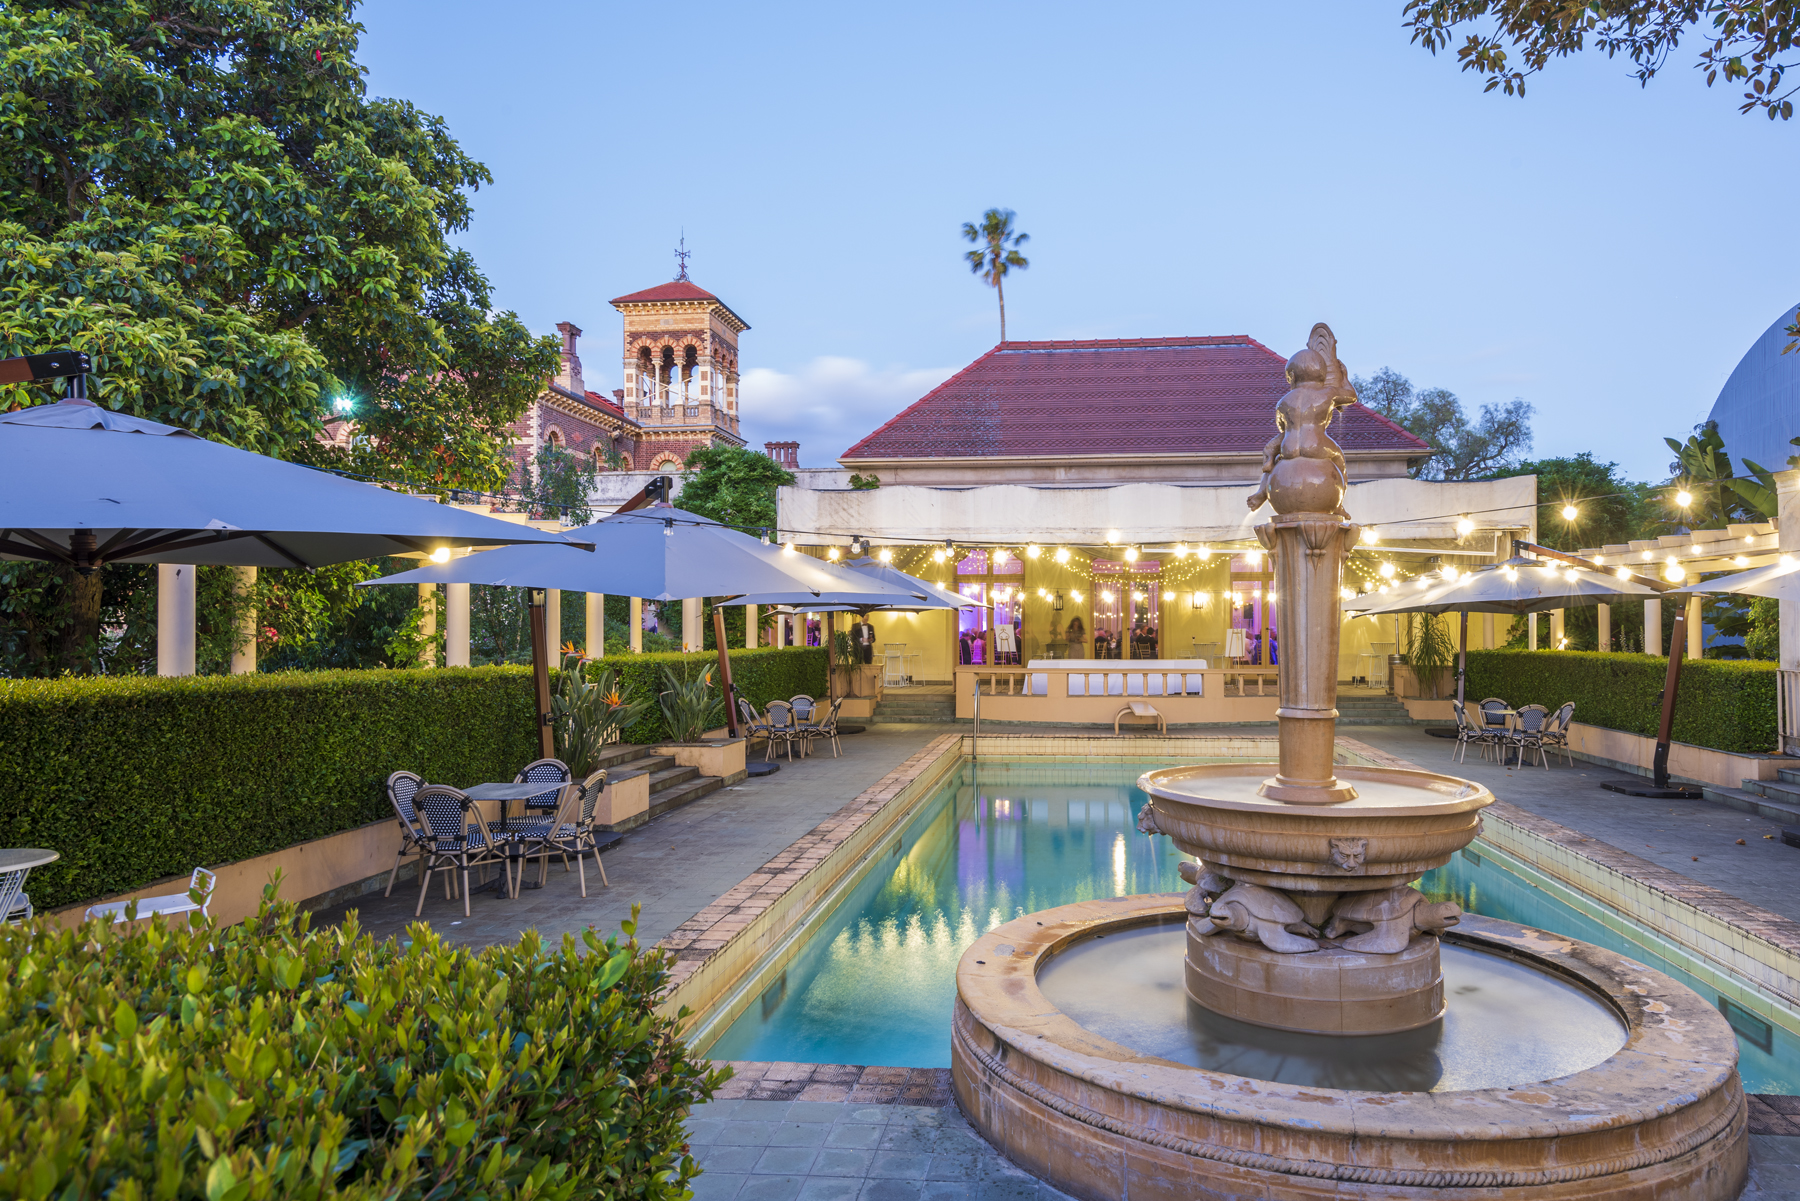 Rippon Lea Estate Corporate Events Parties and Weddings